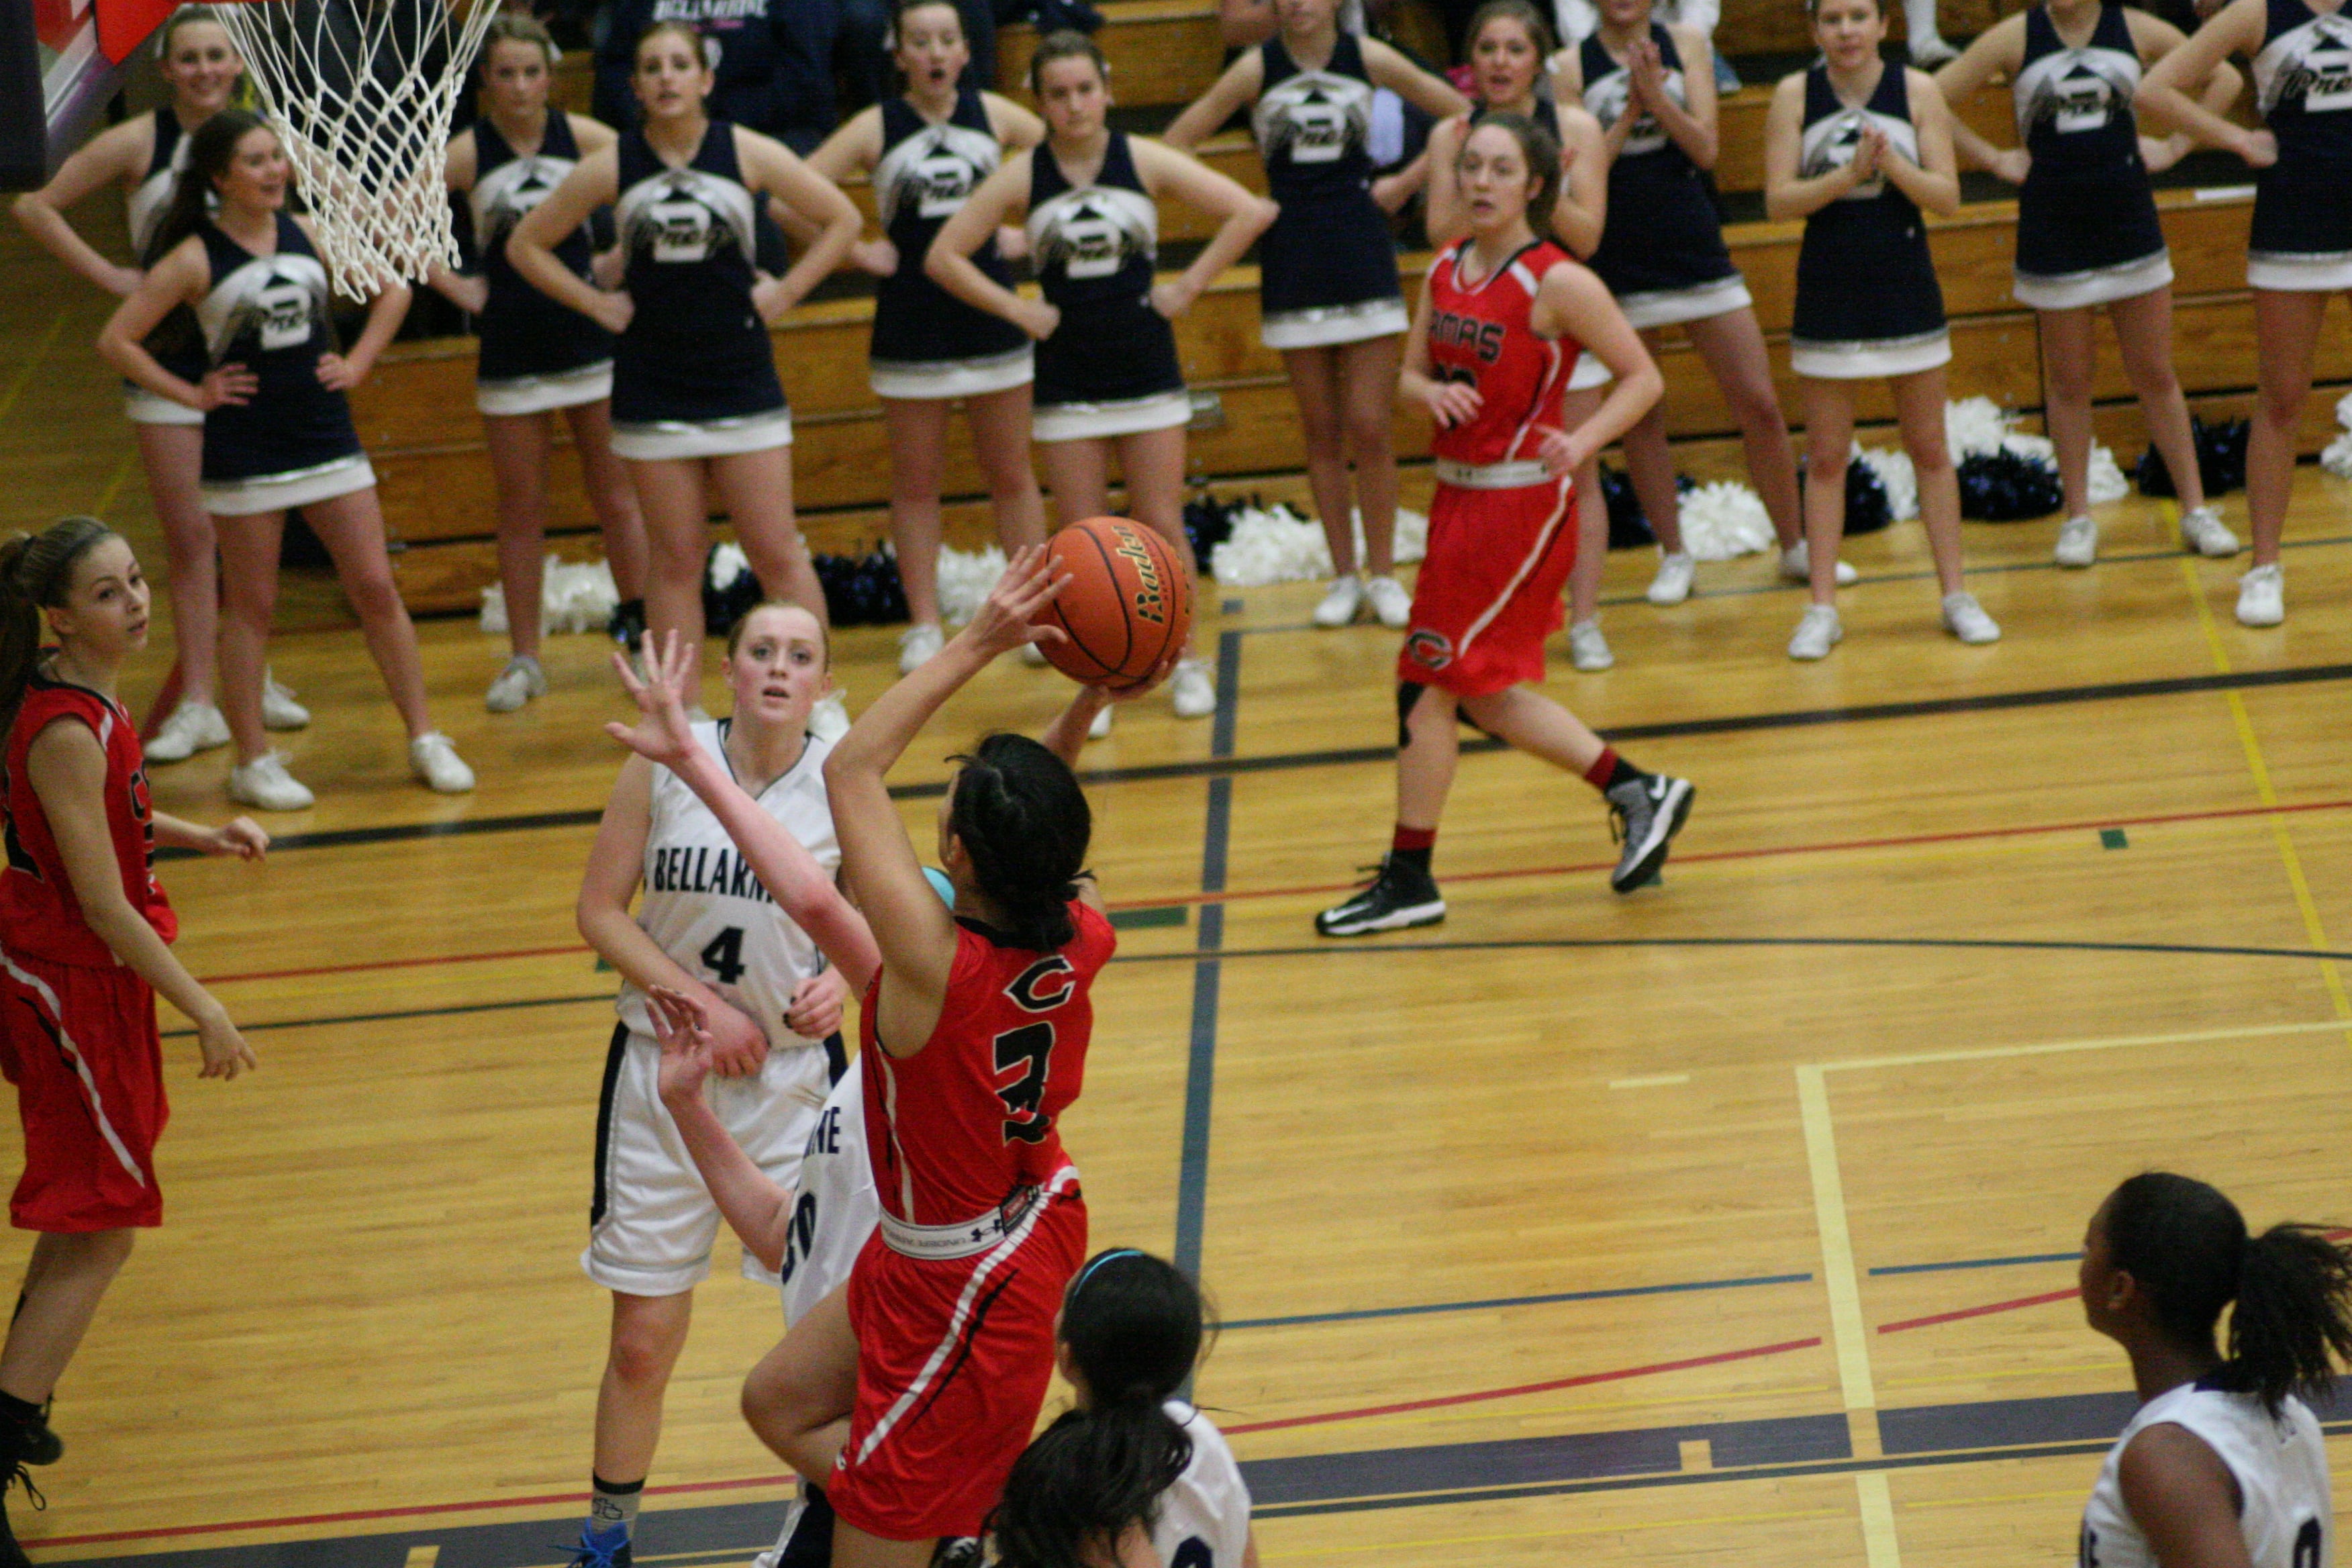 Brenna Khaw takes another crack at the basket.